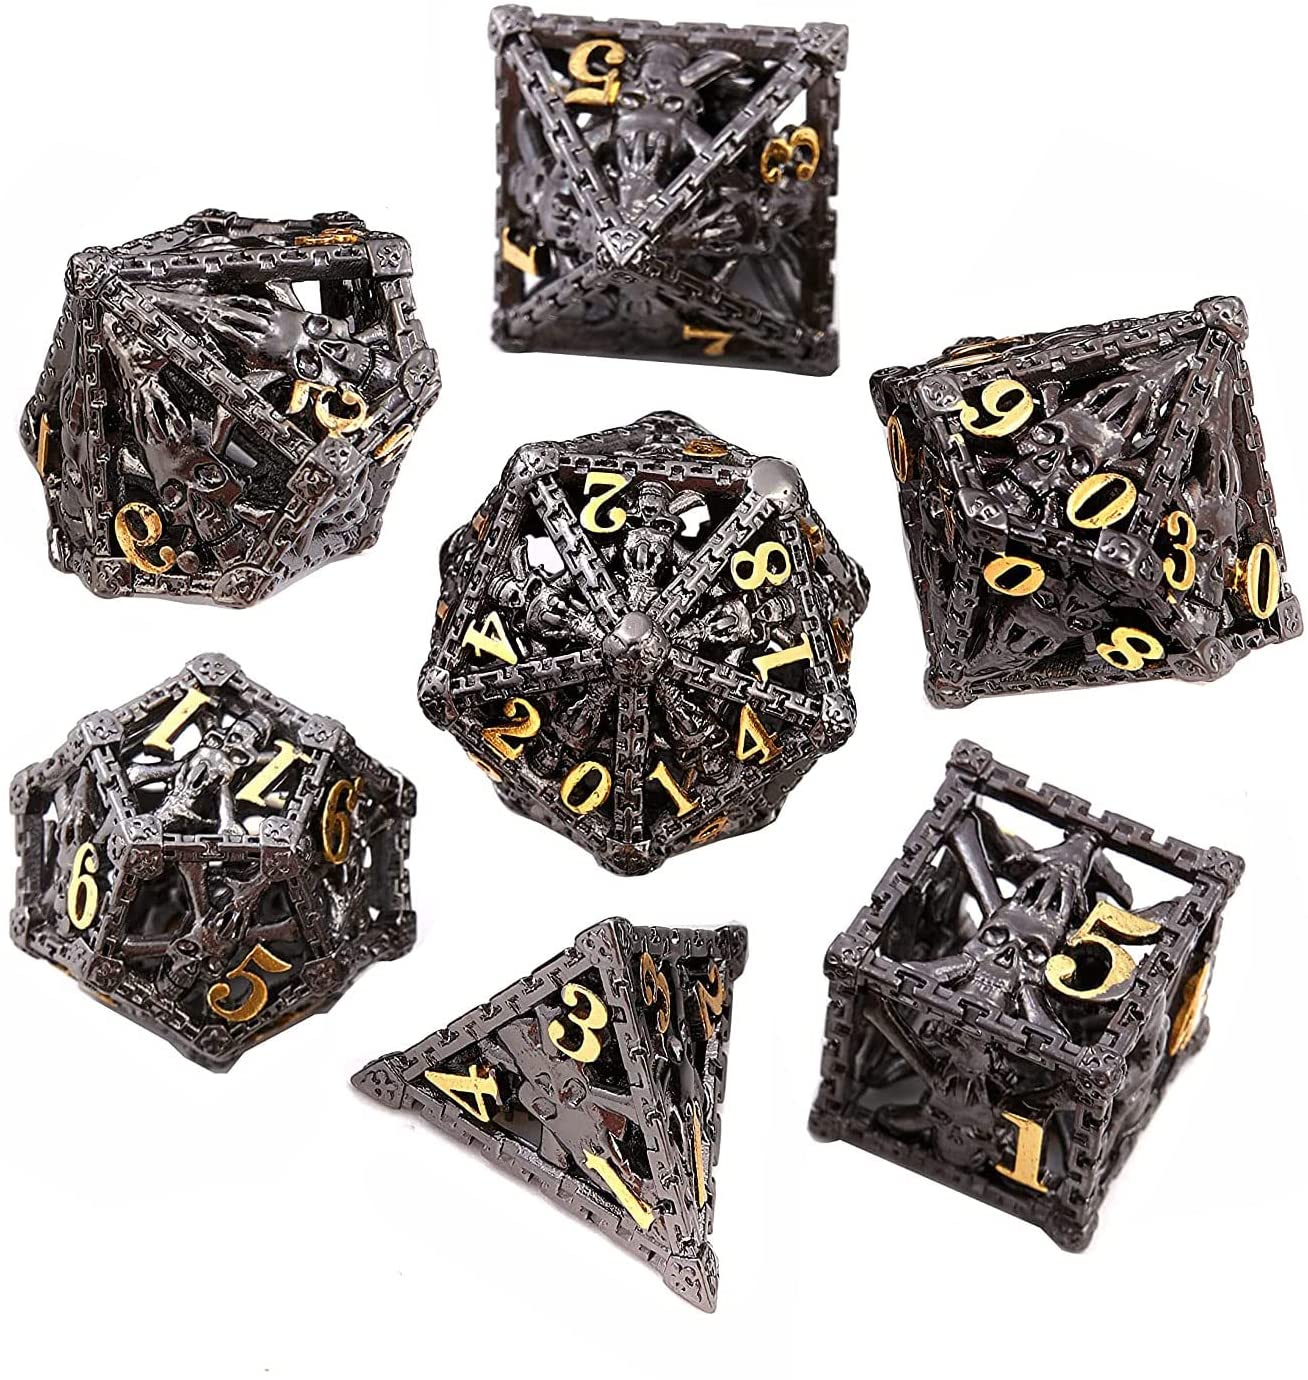 Hollow Metal DND Game Dice Skulls Antique Copper 7Pcs Set for Dungeons and Dragons RPG MTG Table Games D&D Pathfinder Shadowrun and Math Teaching with Metal Case 